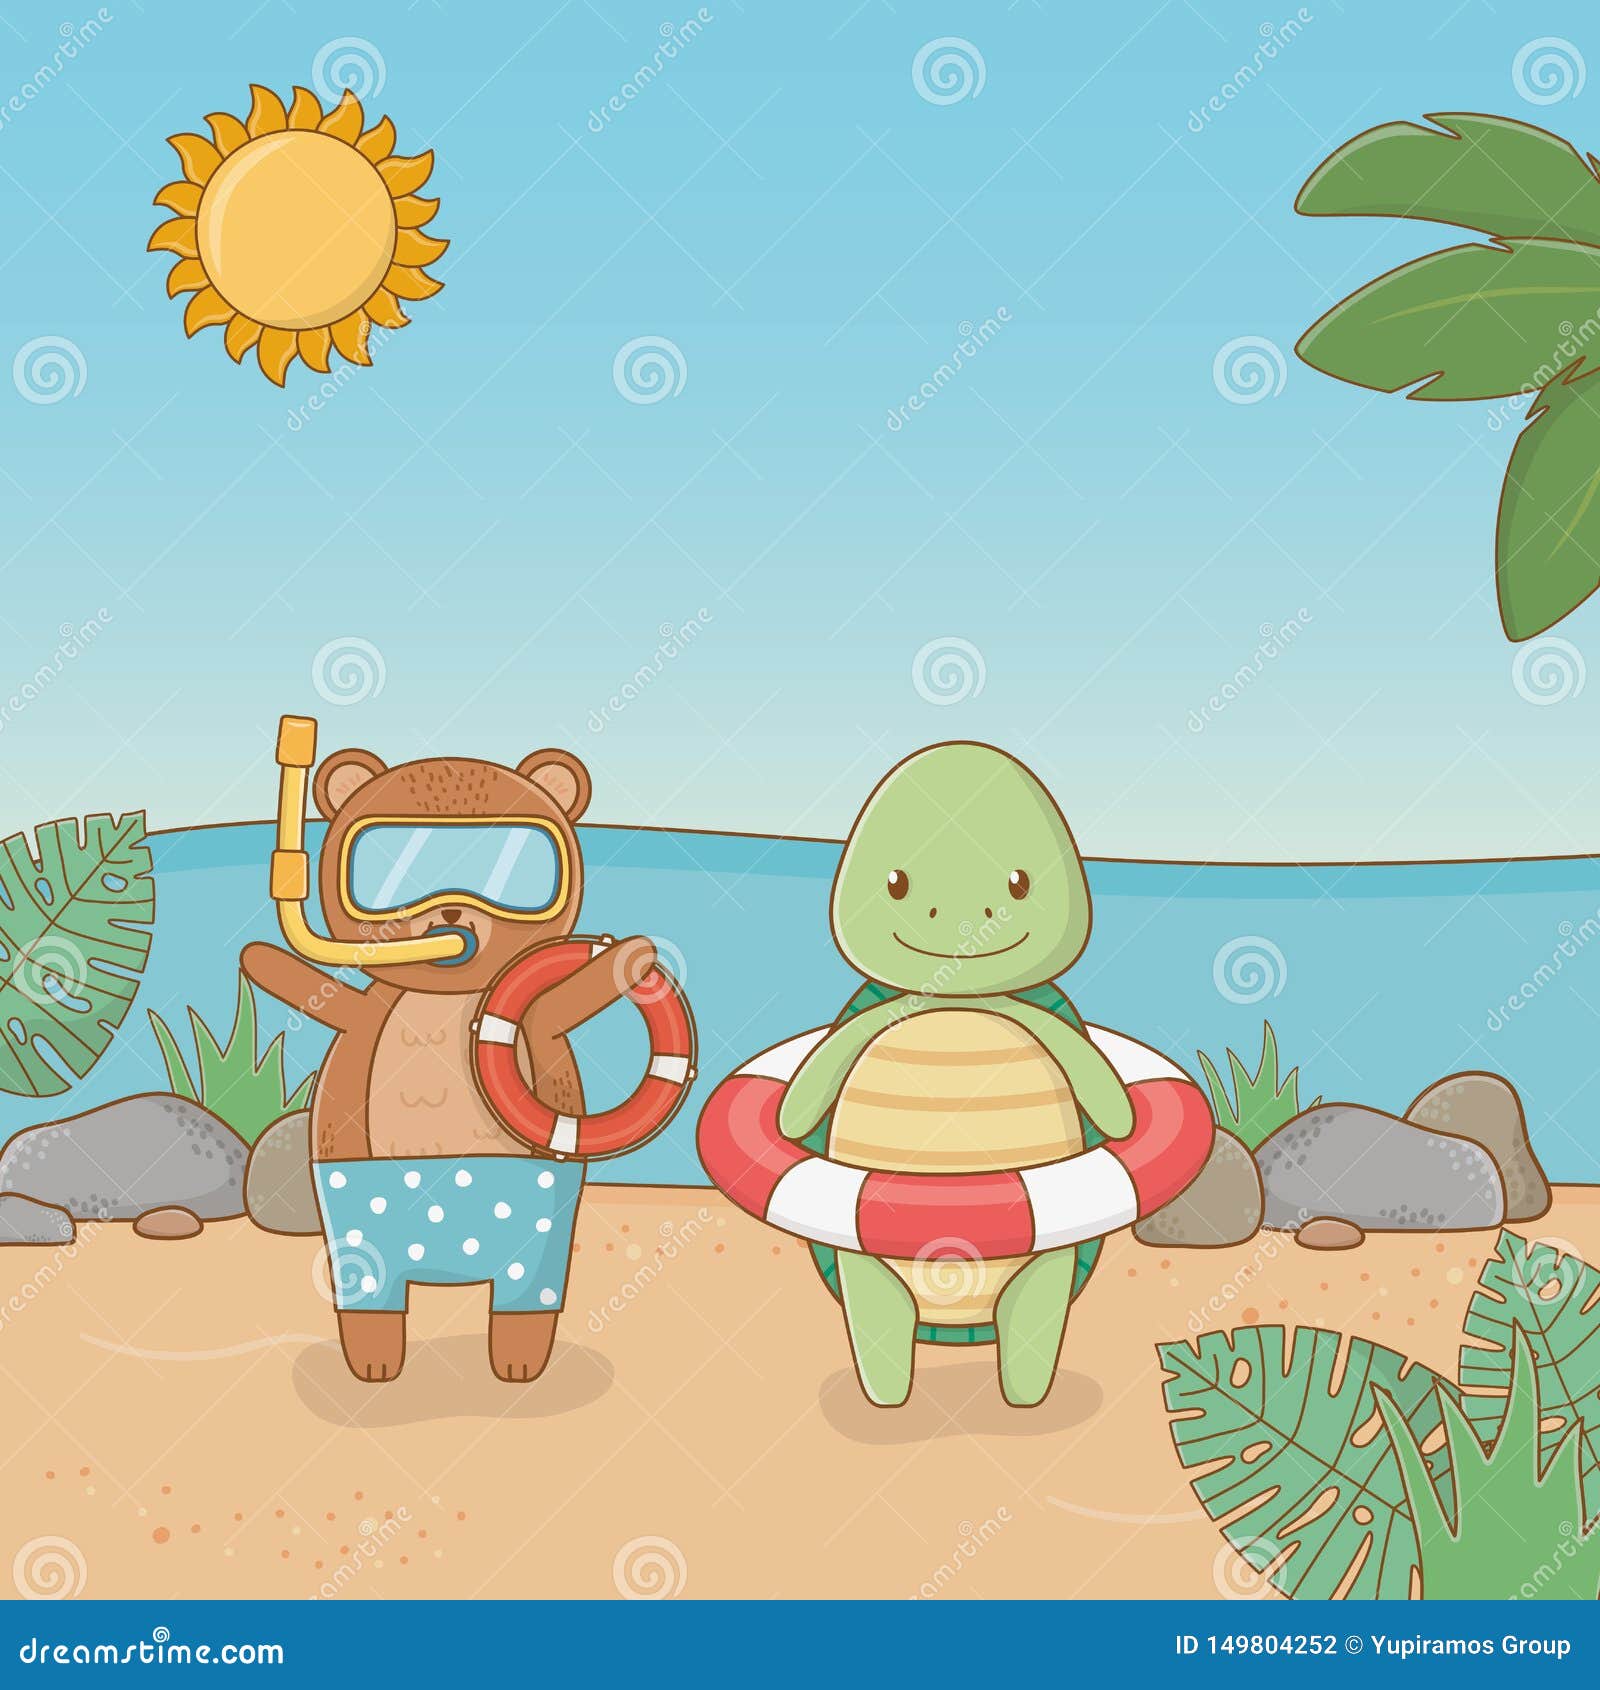 Turtle and Bear in the Beach Design Vector Illustration Stock Vector ...